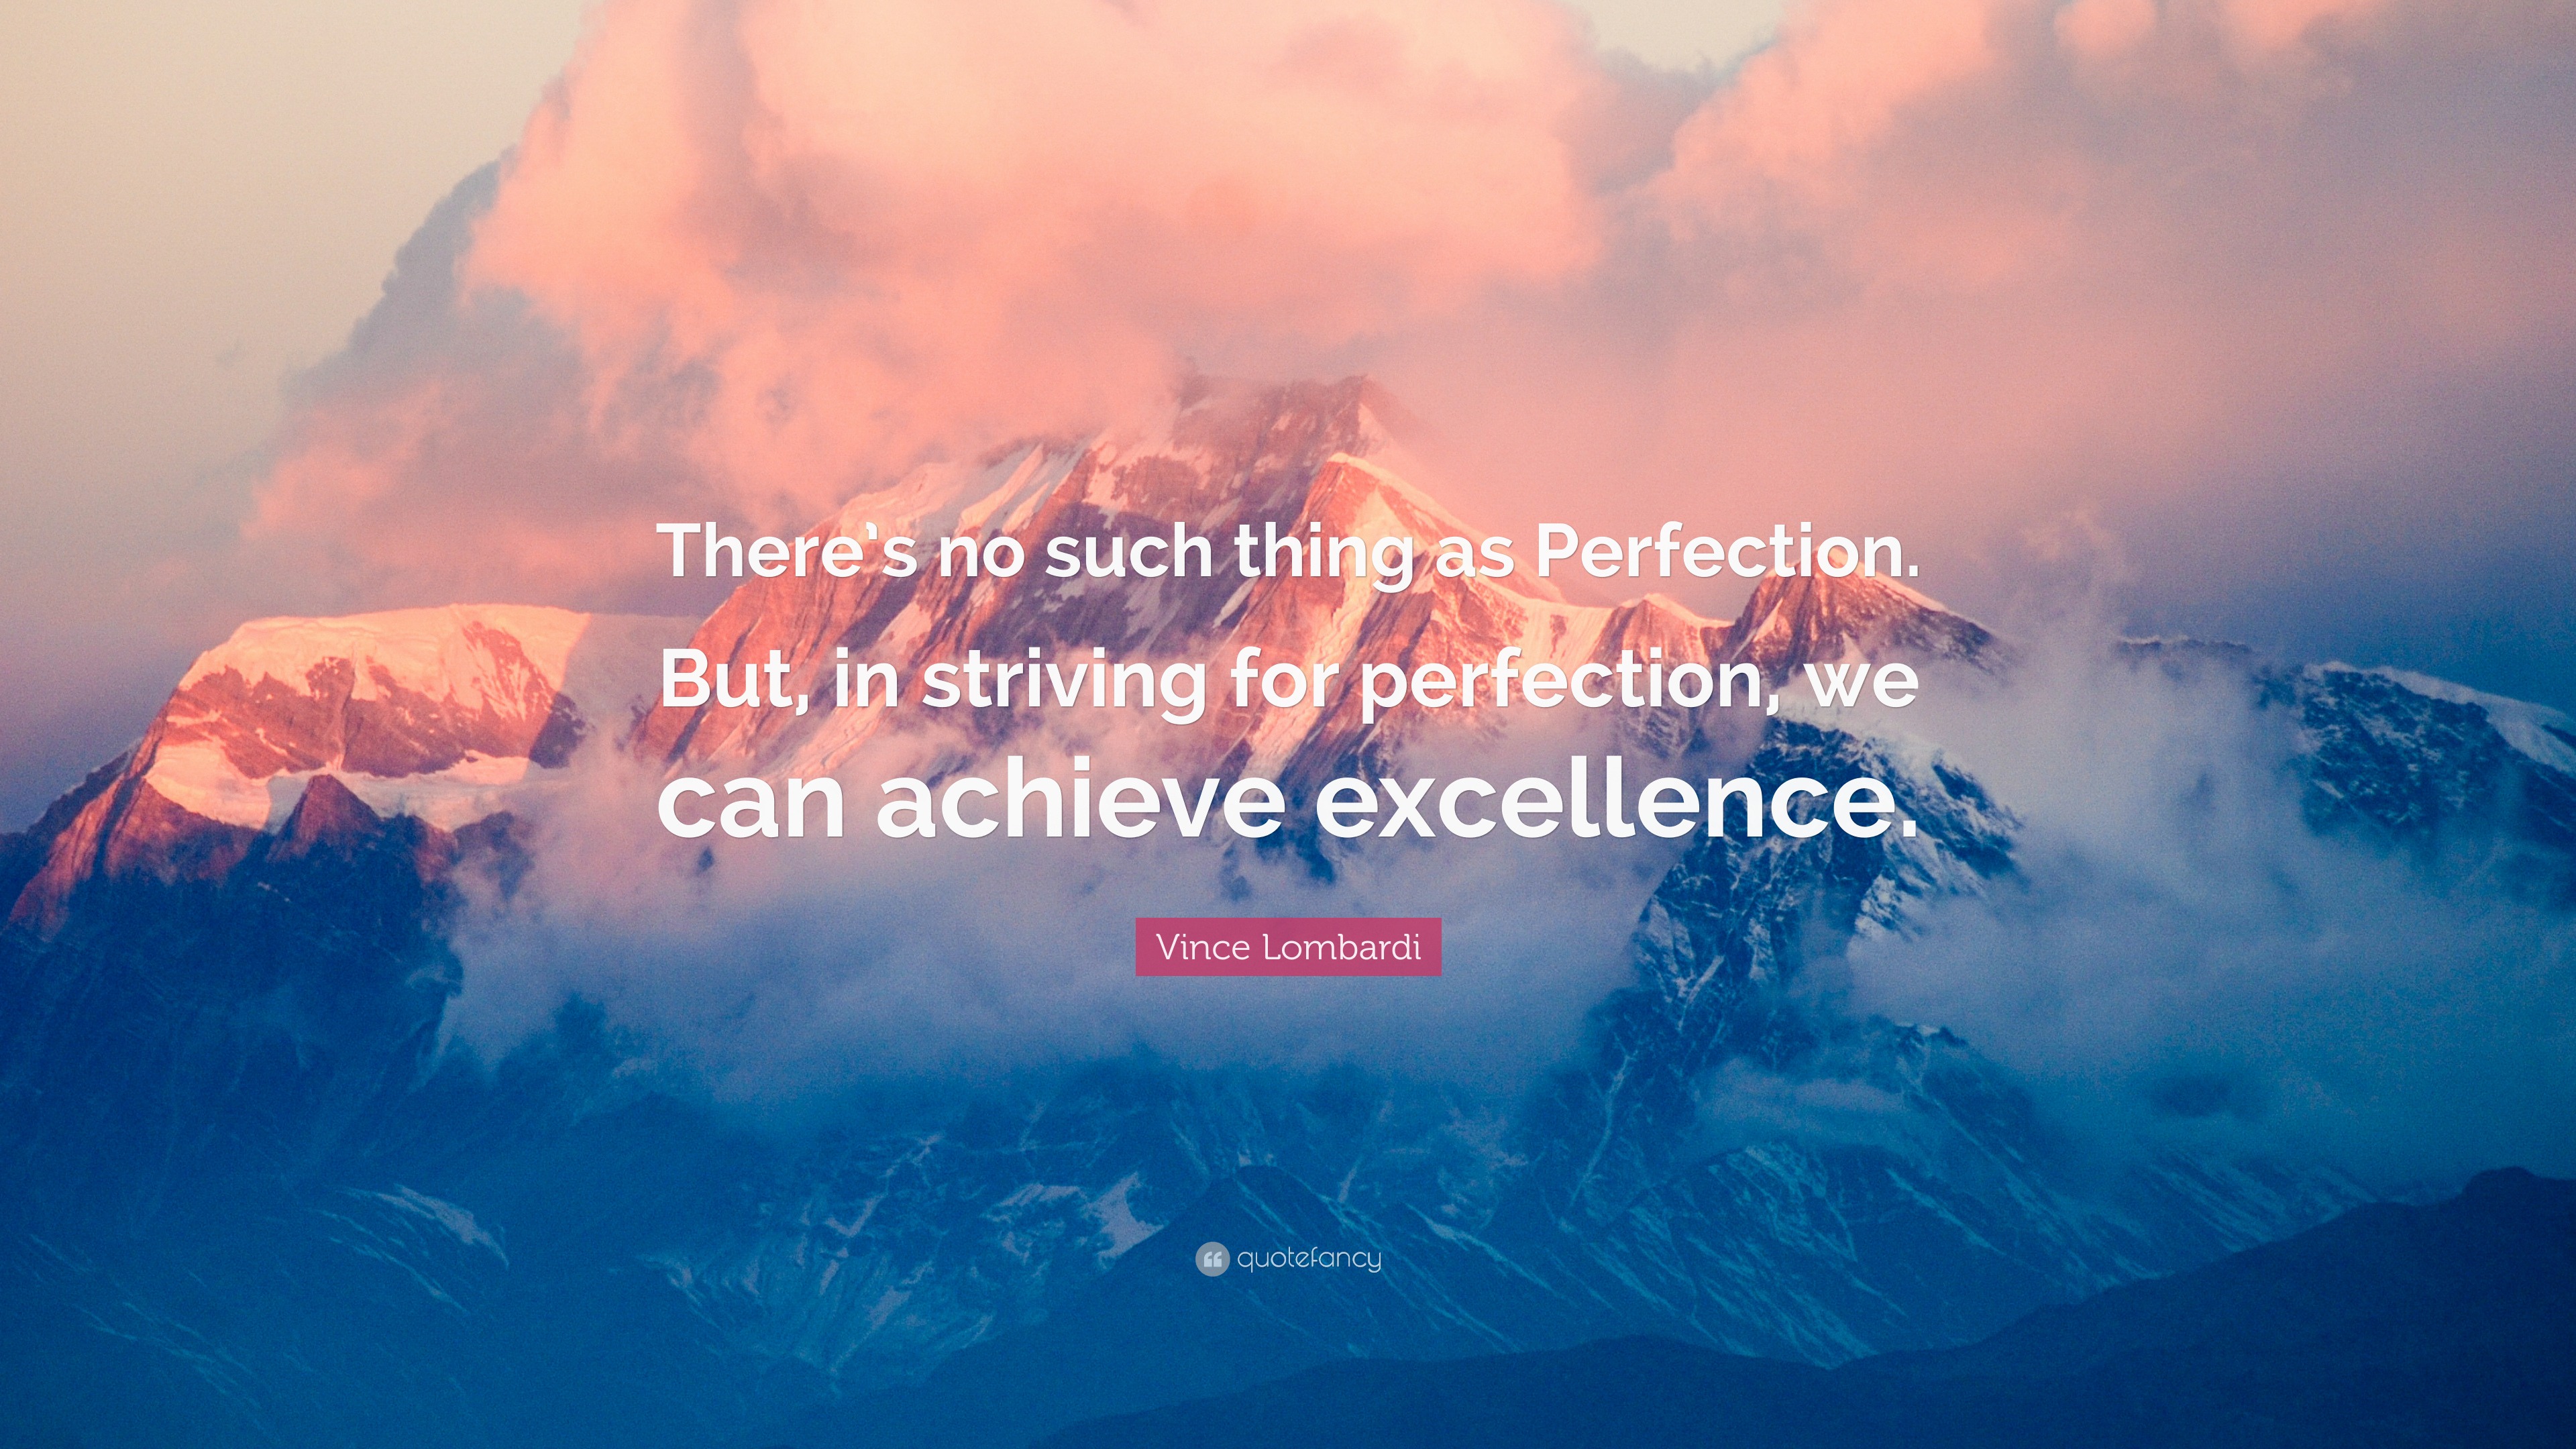 Vince Lombardi Quote: “There’s no such thing as Perfection. But, in